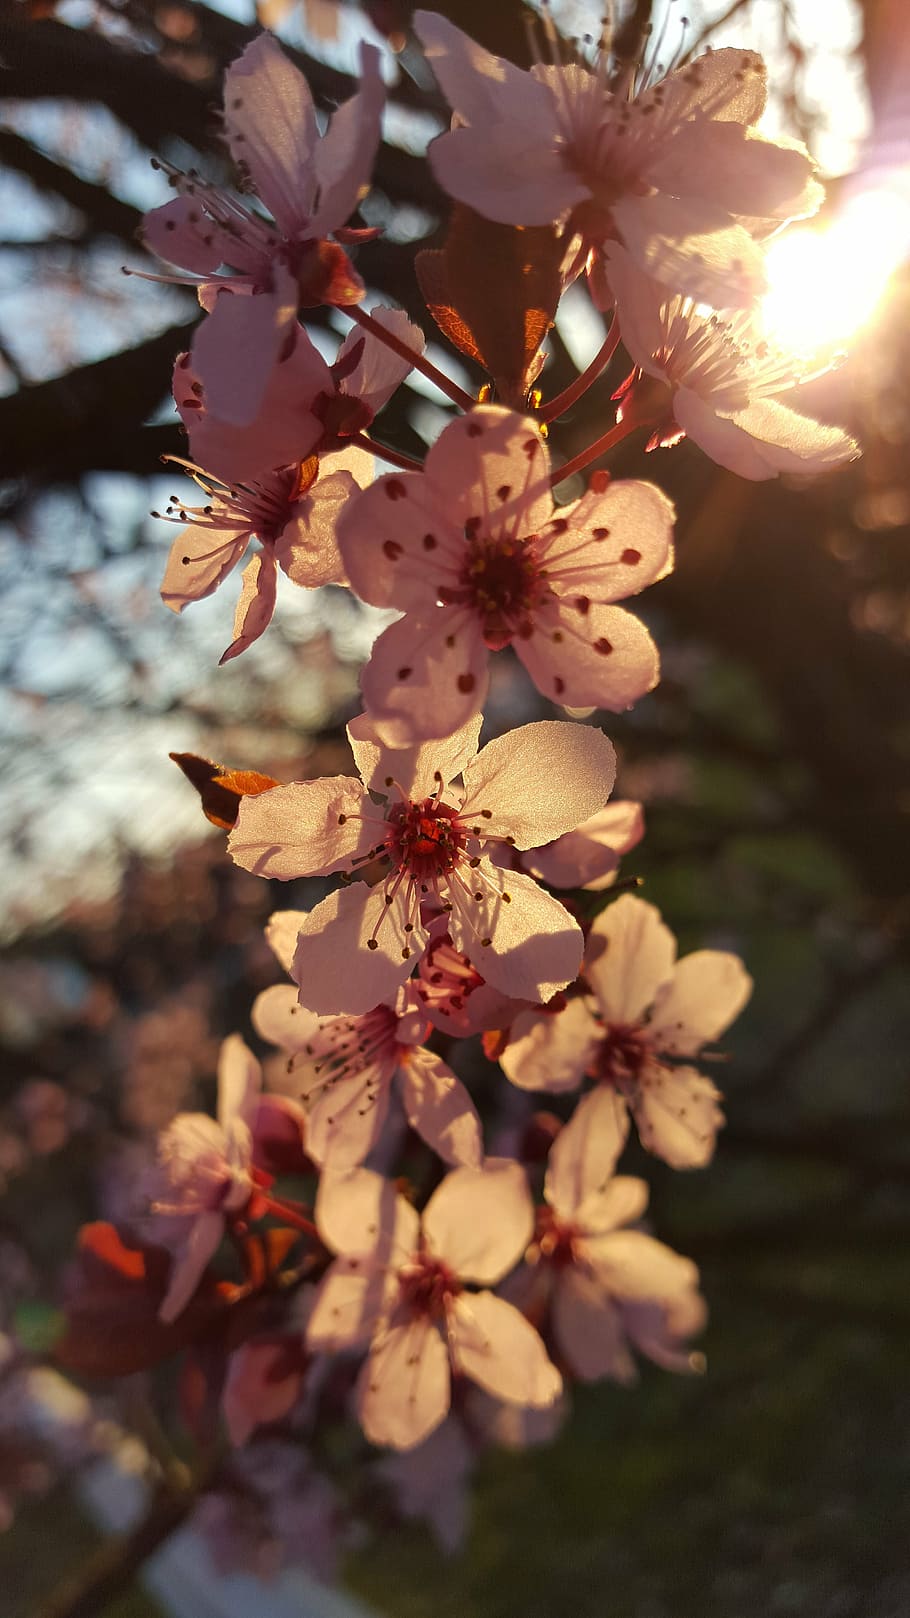 White cherry blossom in close up photography photo  Free Grey Image on  Unsplash